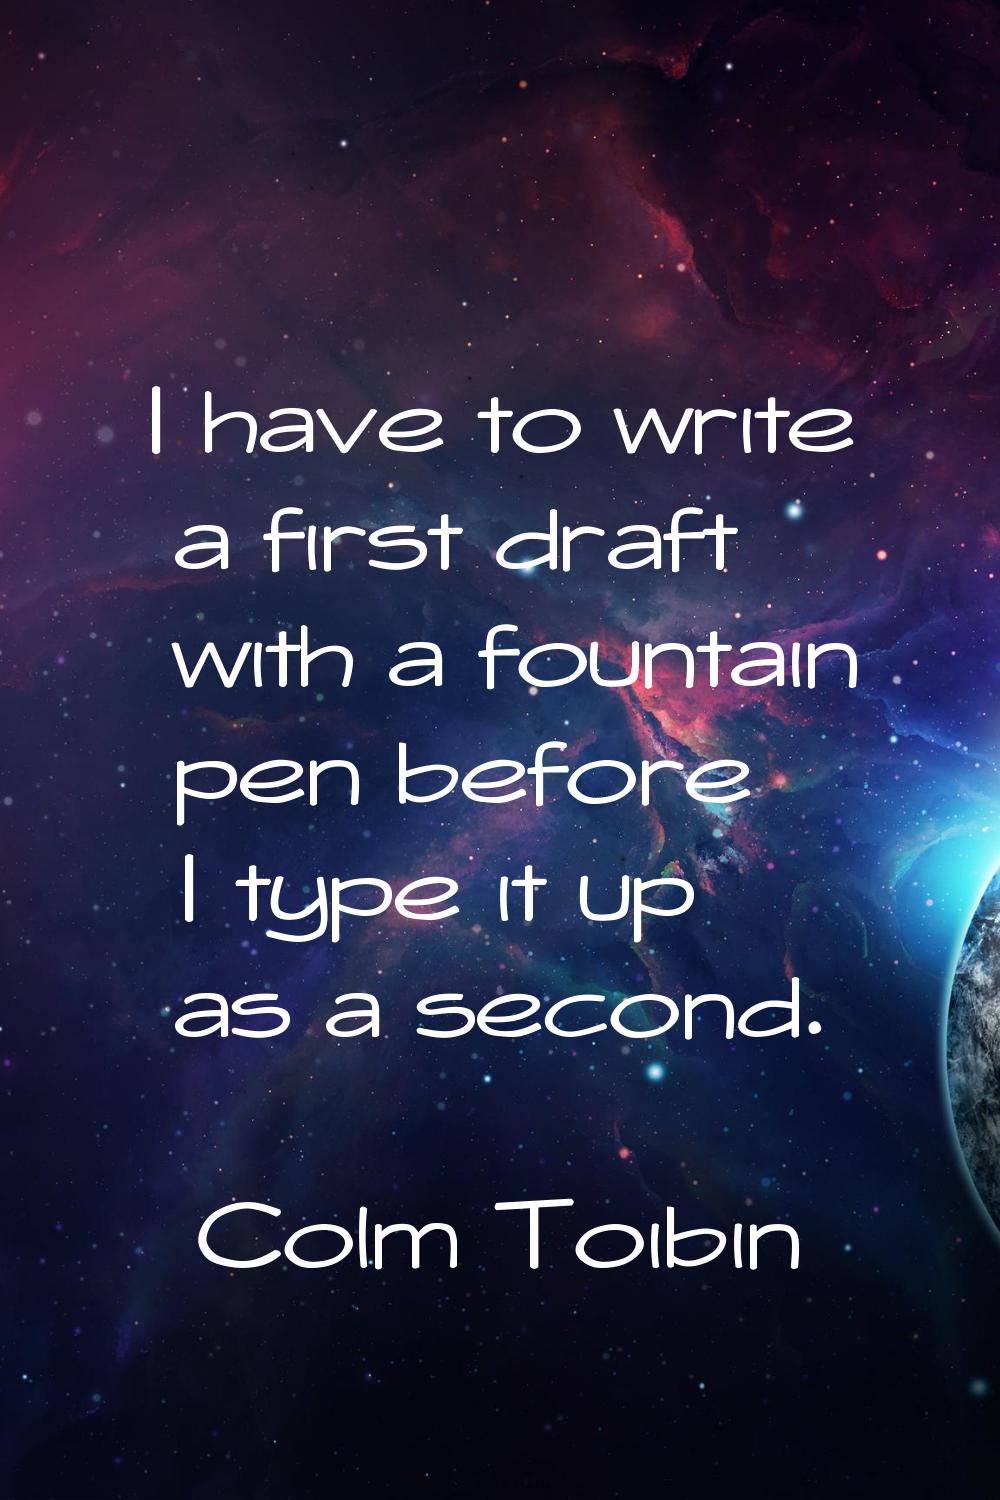 I have to write a first draft with a fountain pen before I type it up as a second.